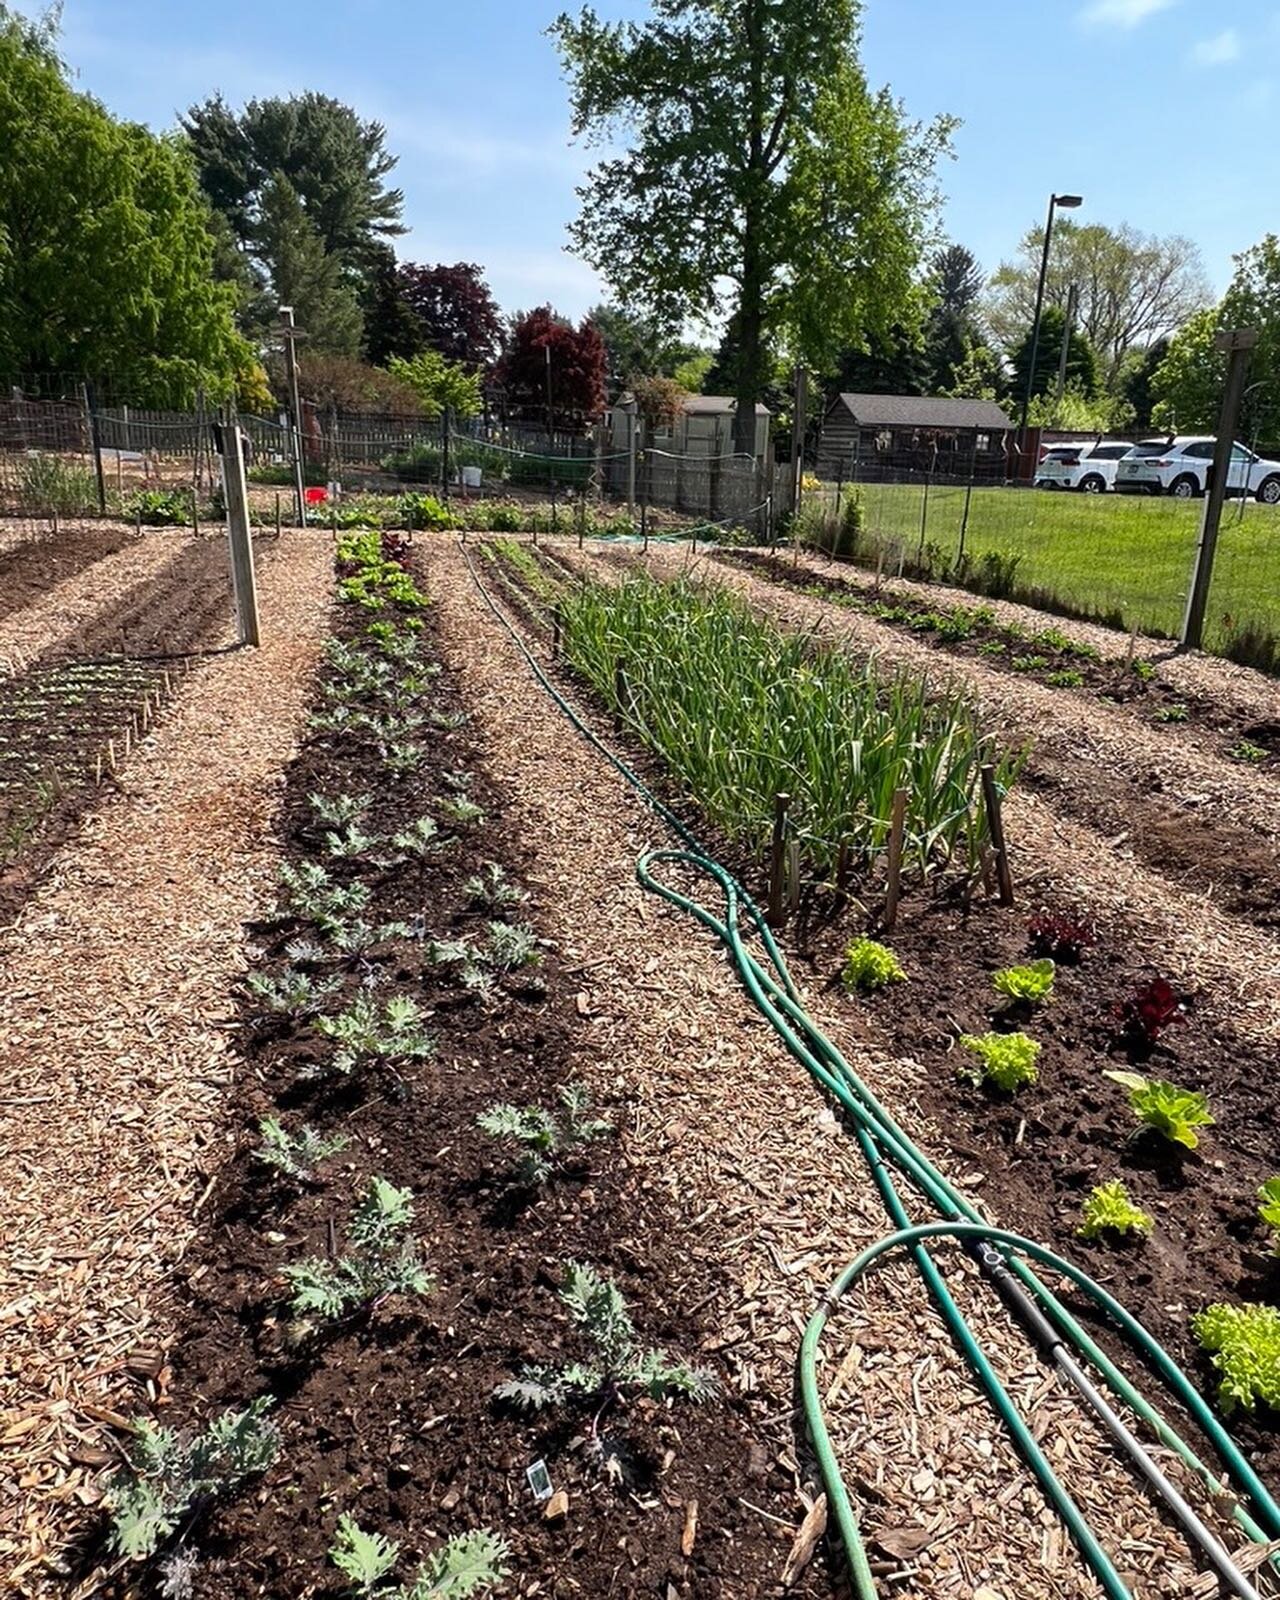 Each Master Gardener class has the privilege of working with Farmer Geoff and Farmer Tom in this beautiful space growing food that is donated to Open Door in Freehold. I've been gardening my whole life and there's always more to learn. @mame5011 for 